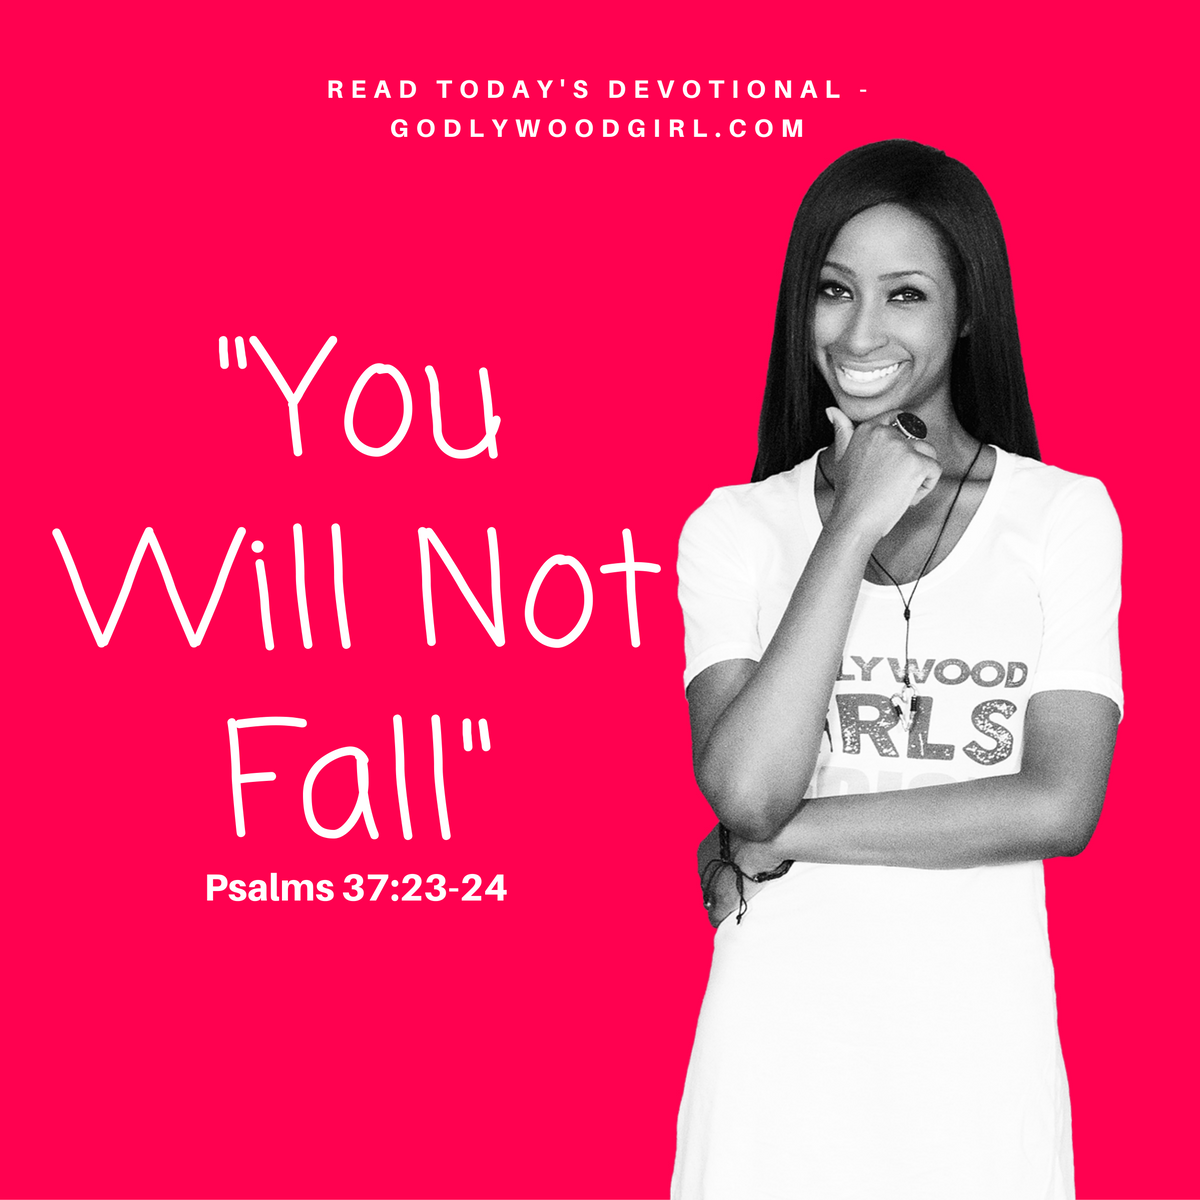 Today's Daily Devotional for Women - You Will Not Fall